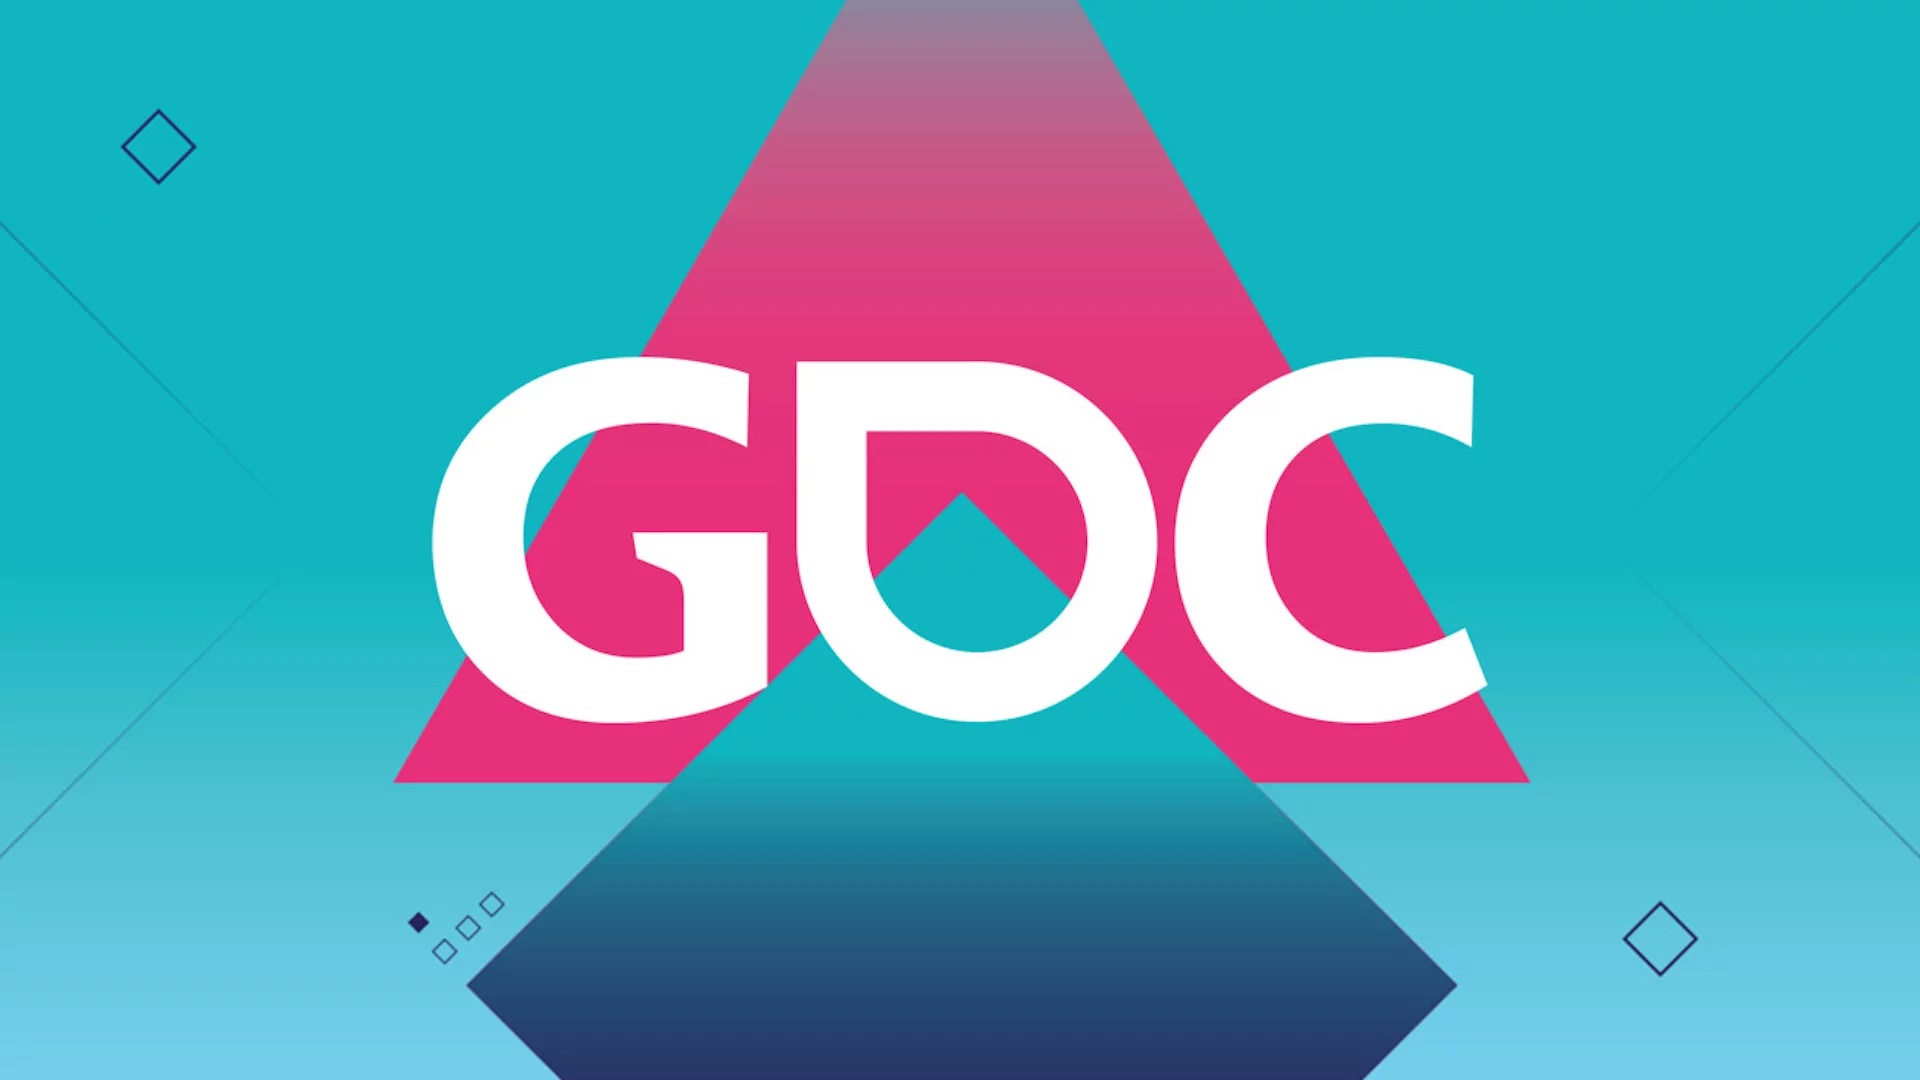 Source: Game Developers Conference Logo